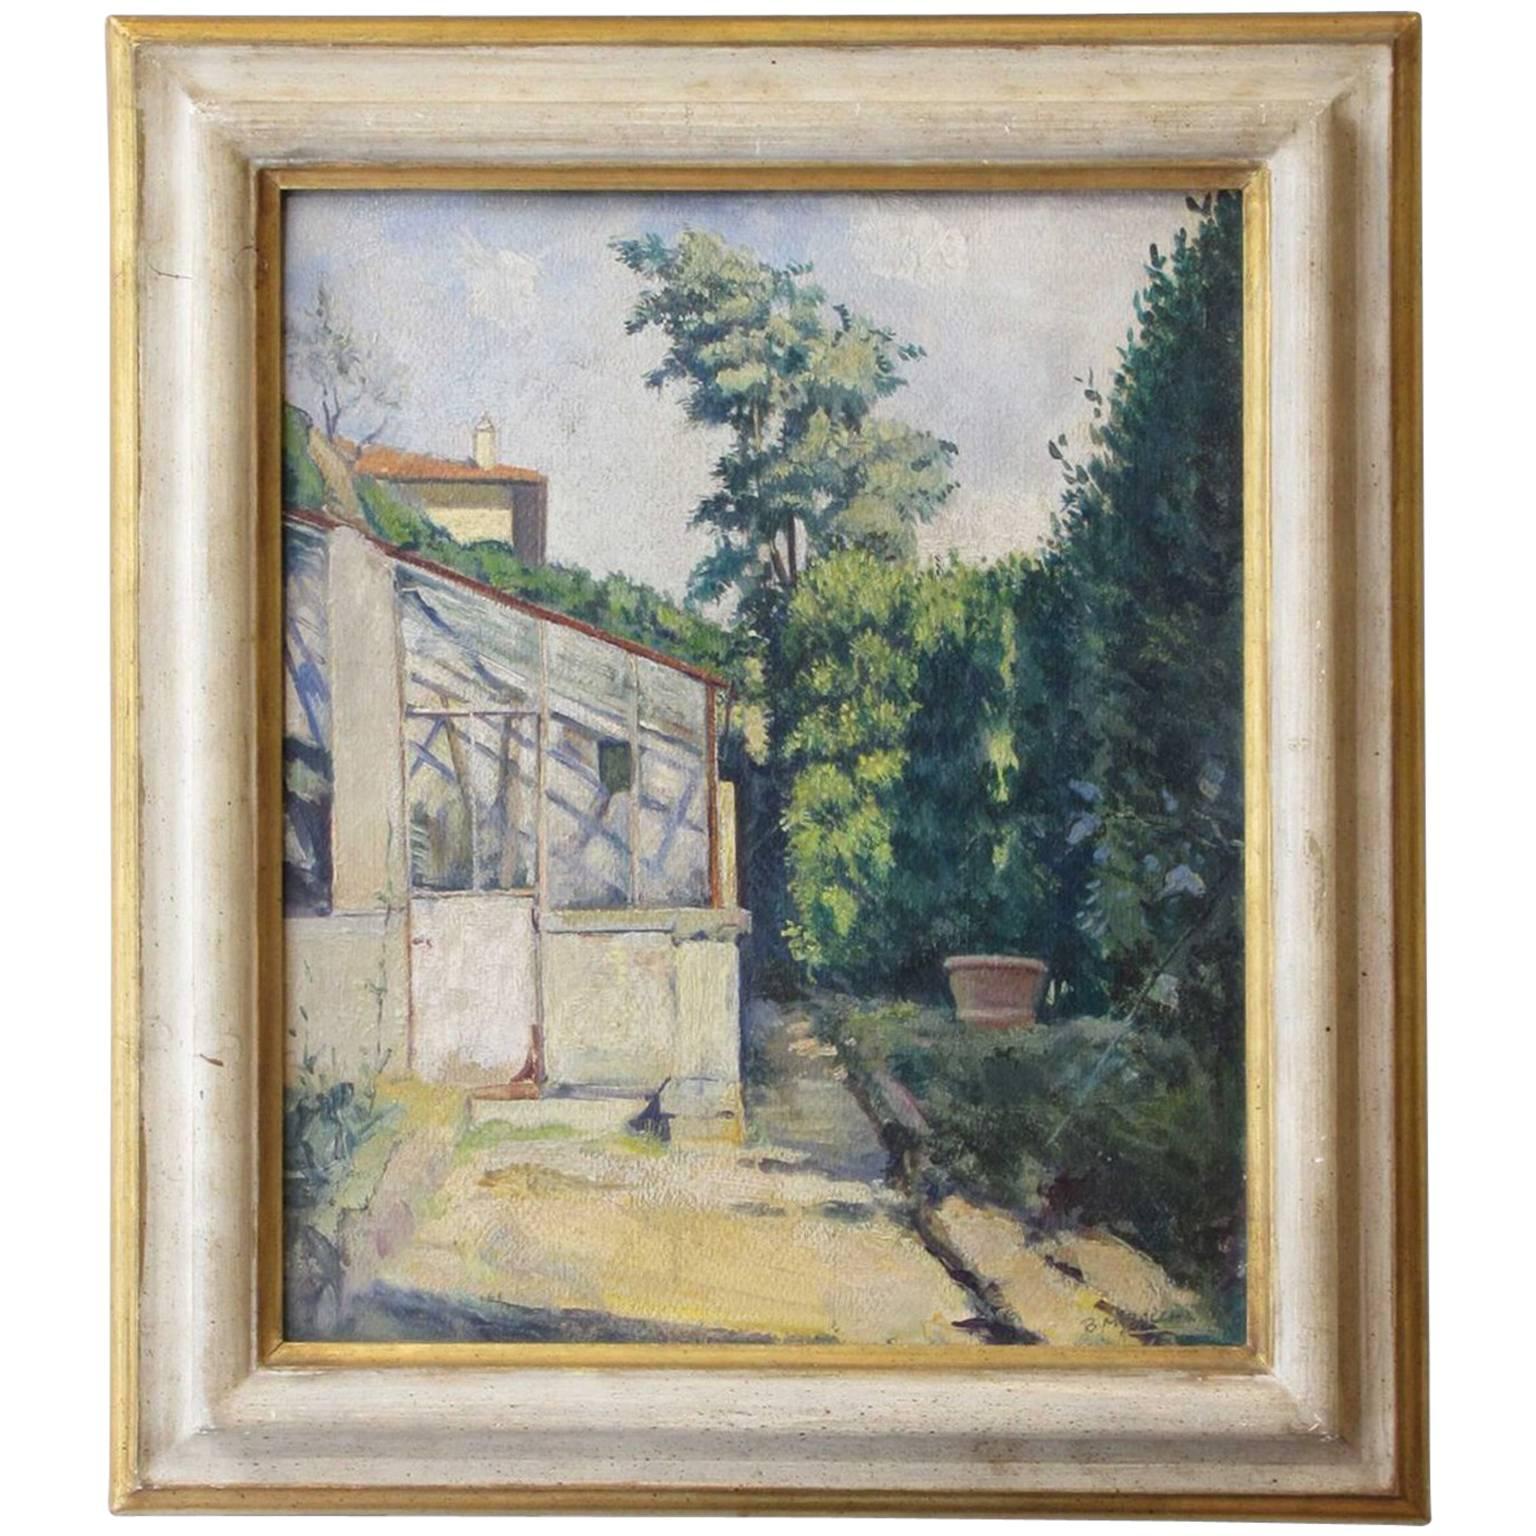 Italian Mid-20th Century Painting Depicting Garden View by Baccio Maria Bacci For Sale